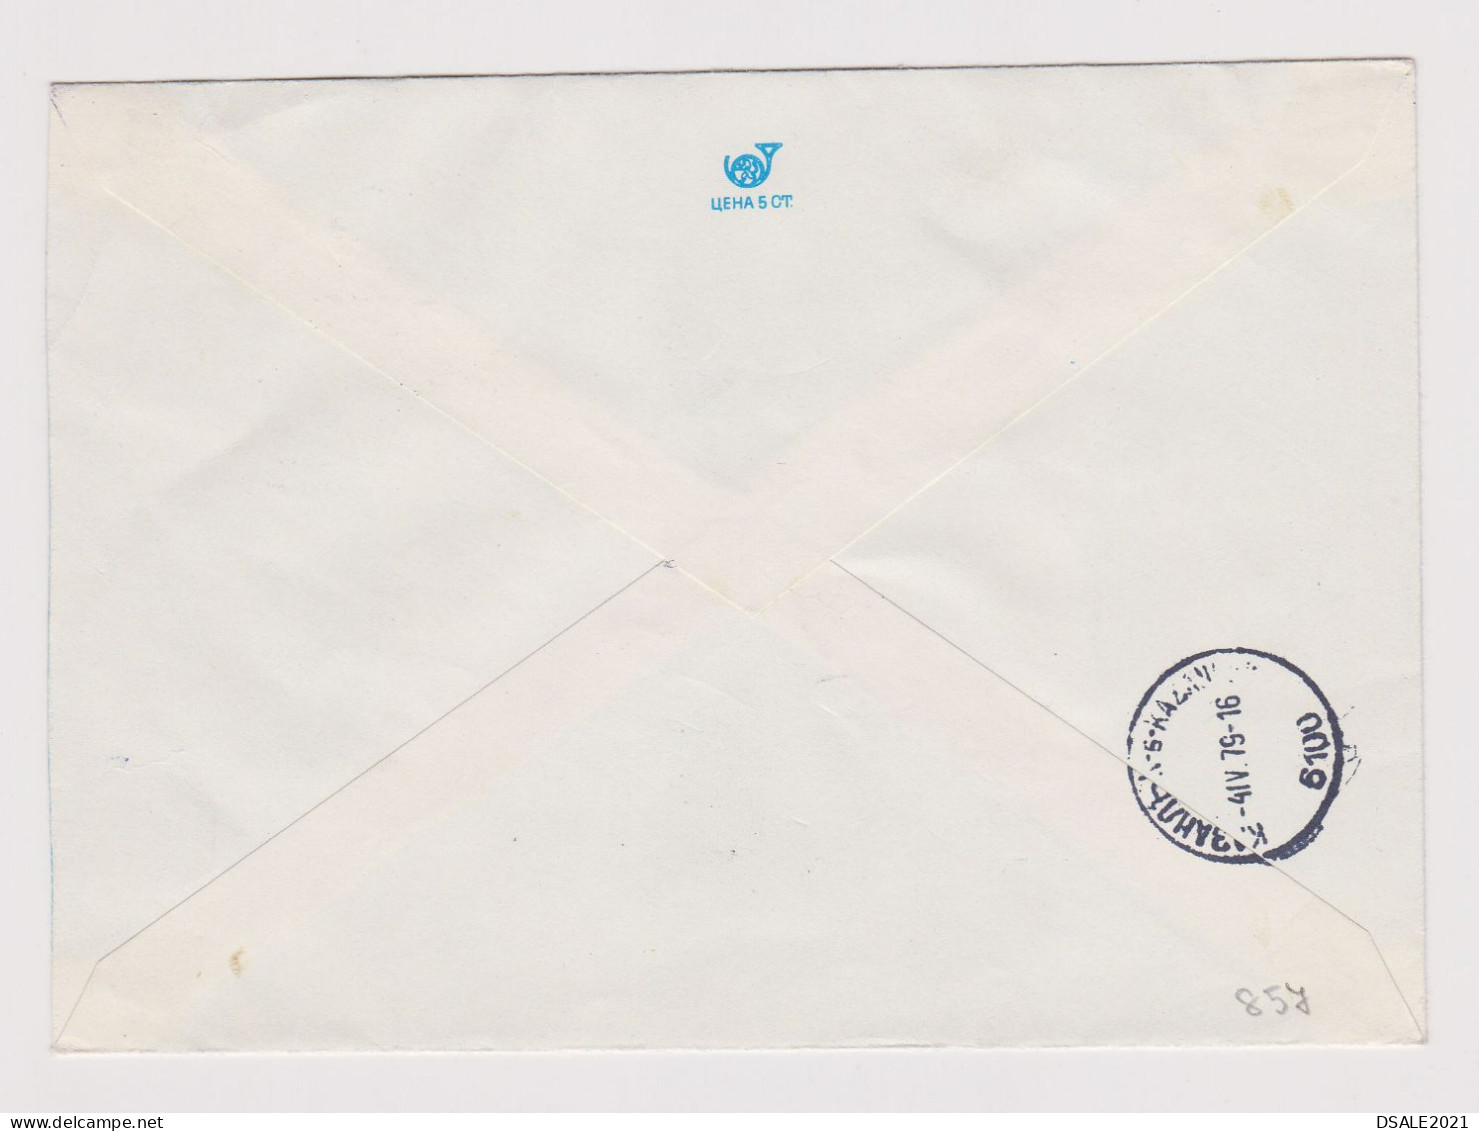 Bulgaria Bulgarien 1979 Ganzsachen R-Brief, Postal Stationery Cover, Registered W/Topic Stamps Flower, Architecture /857 - Buste